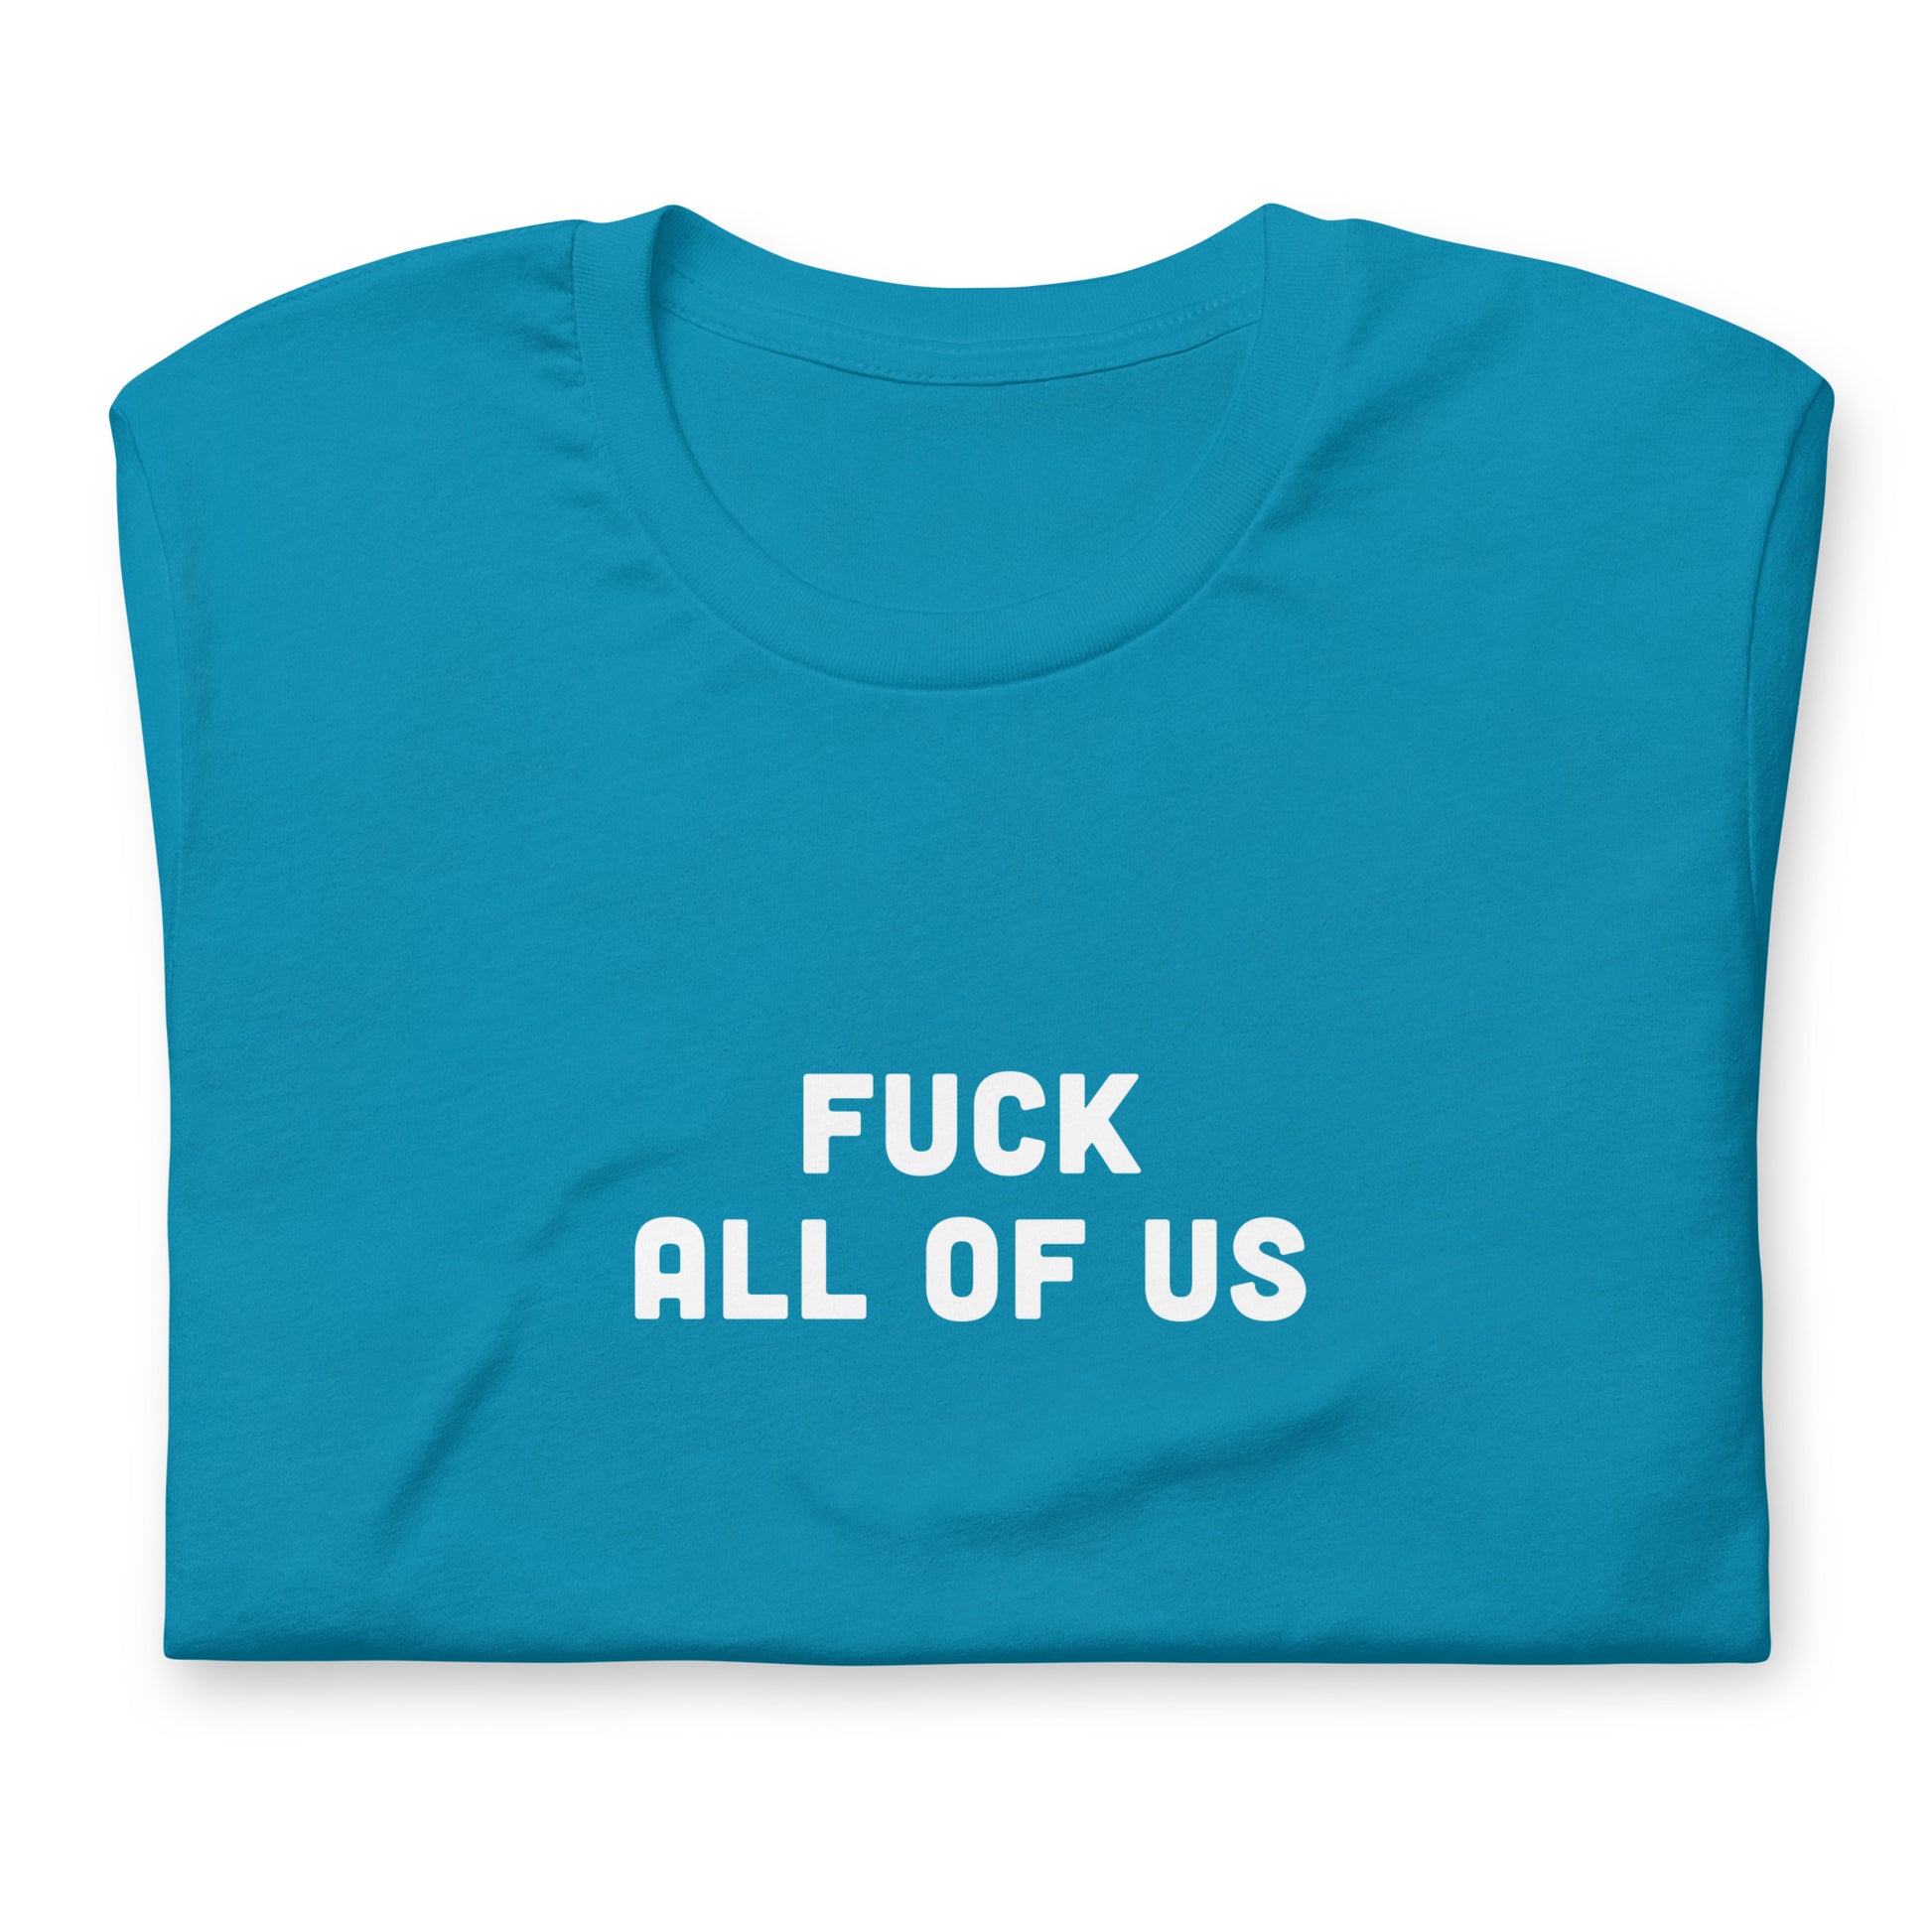 Fuck All Of Us T-Shirt Size M Color Navy